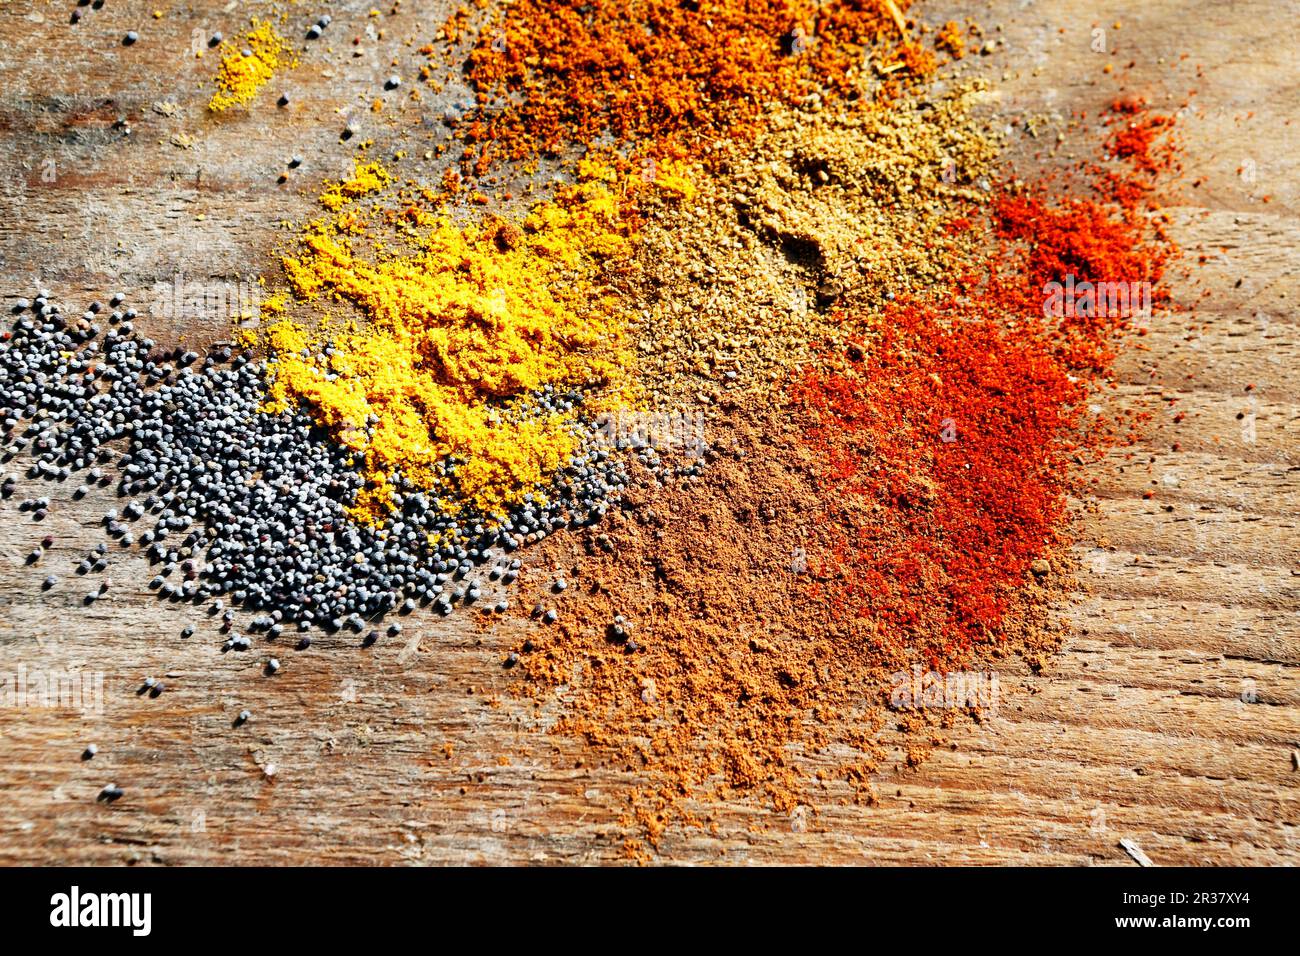 Various spices and poppyseeds on a wooden surface Stock Photo